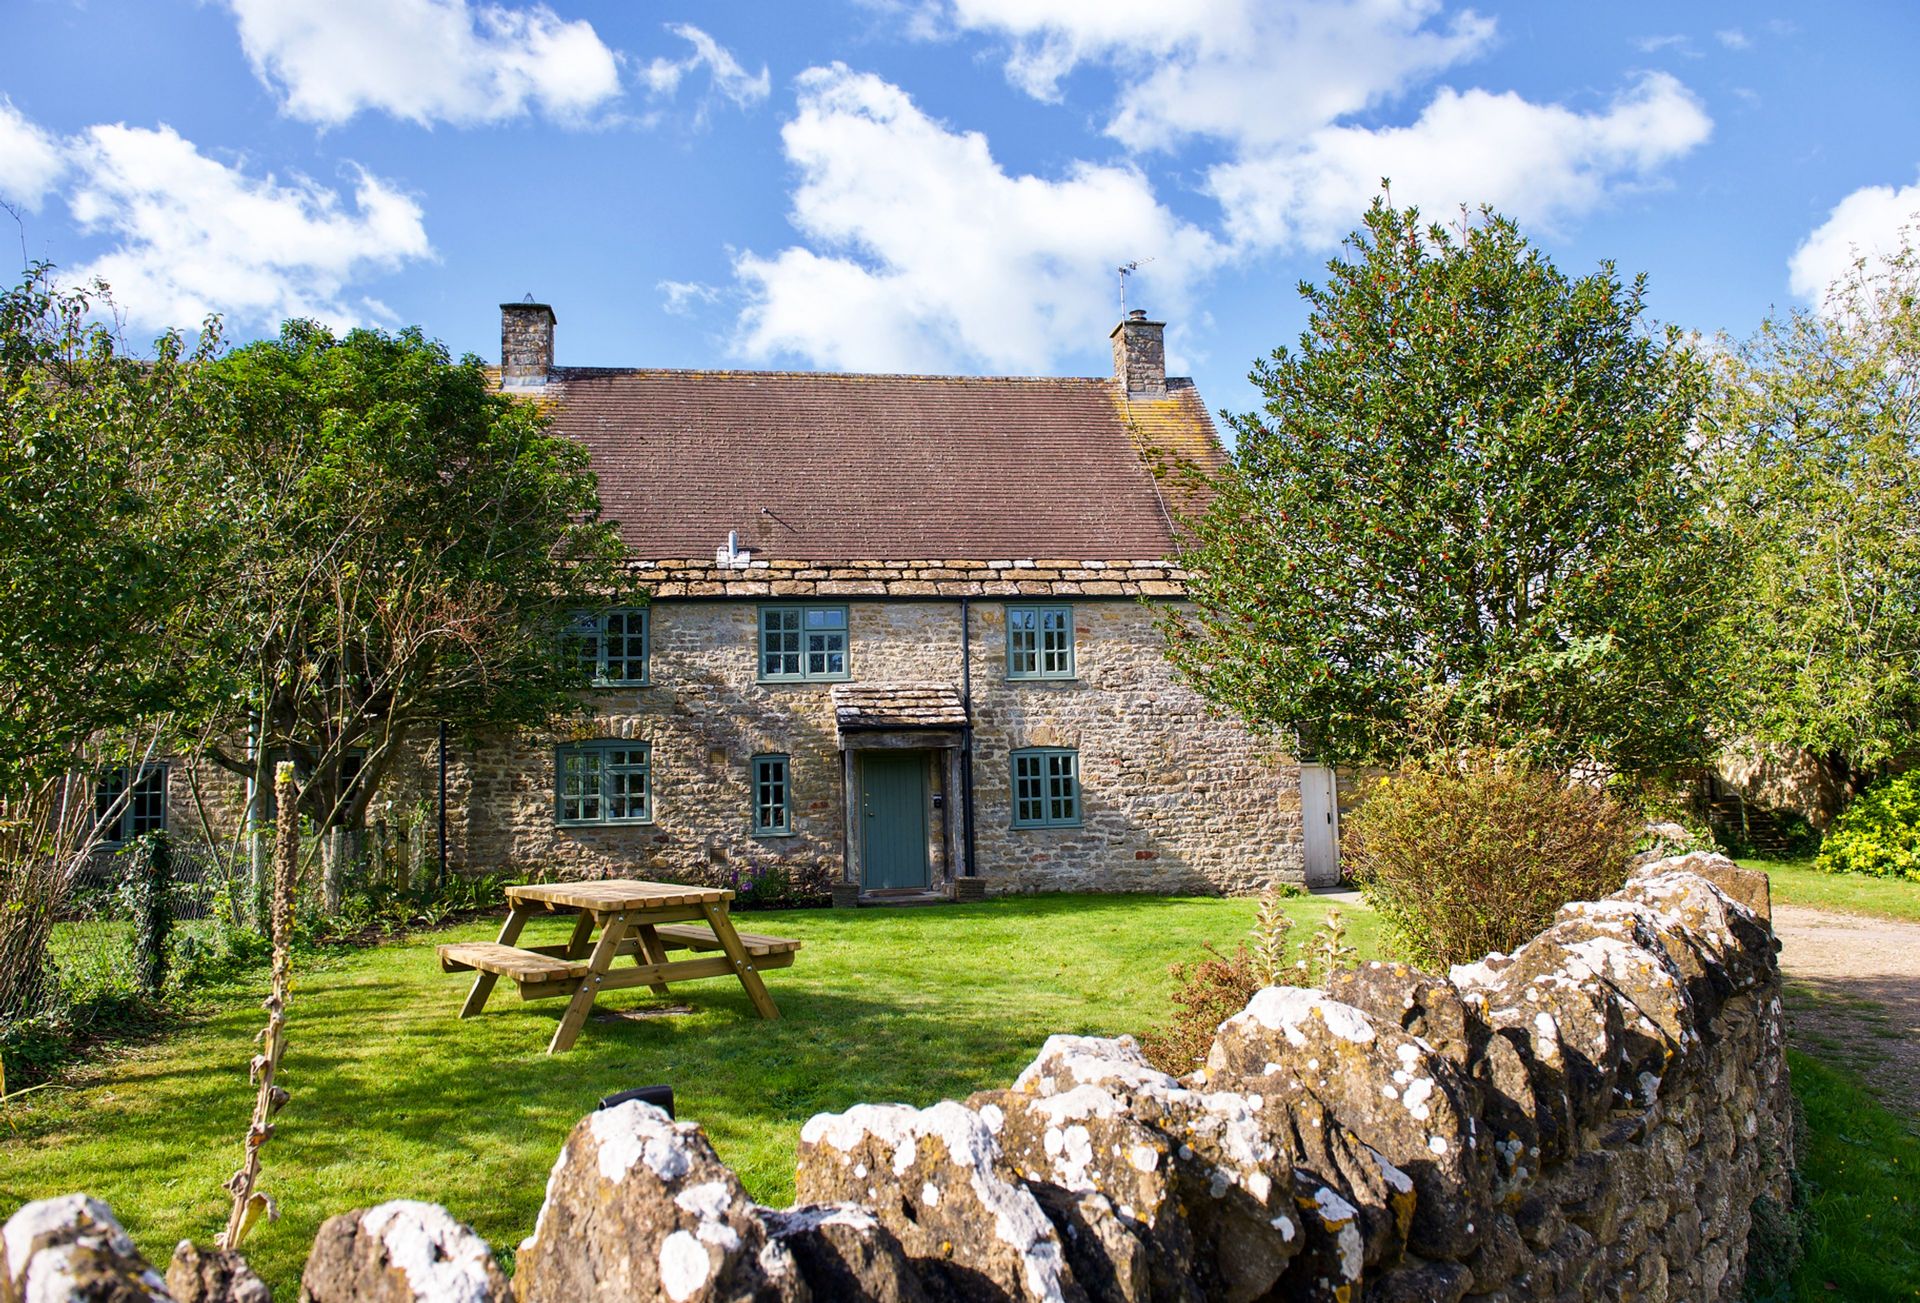 More information about Bake House Cottage - ideal for a family holiday